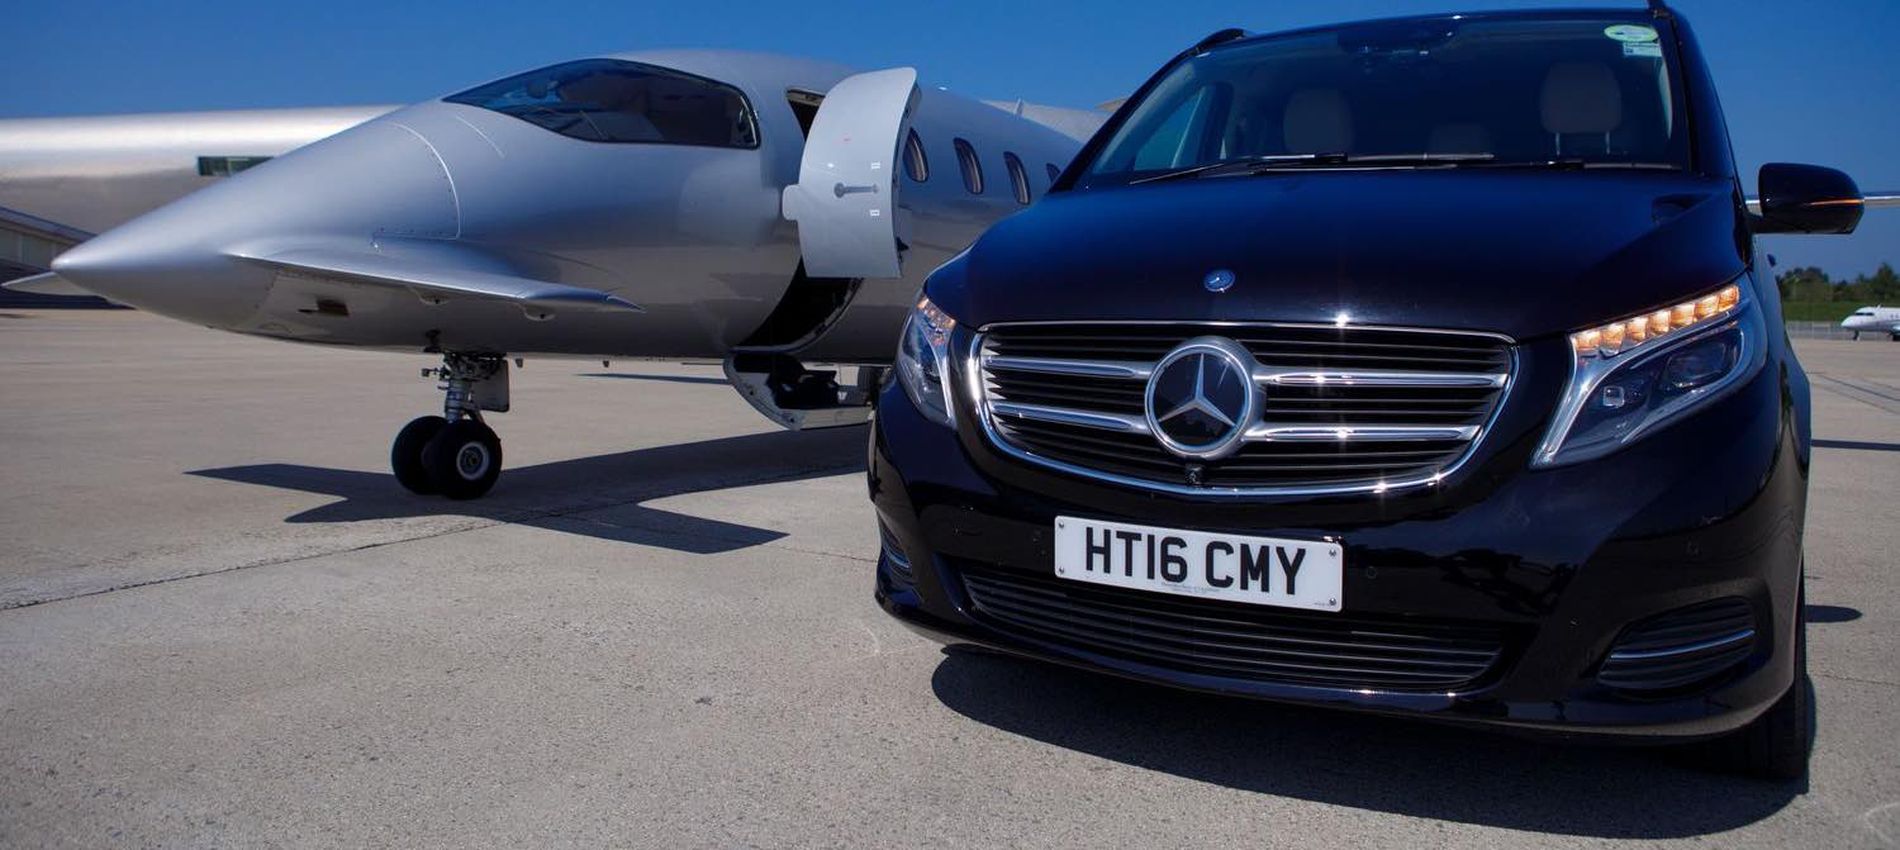 Airport transfers in London